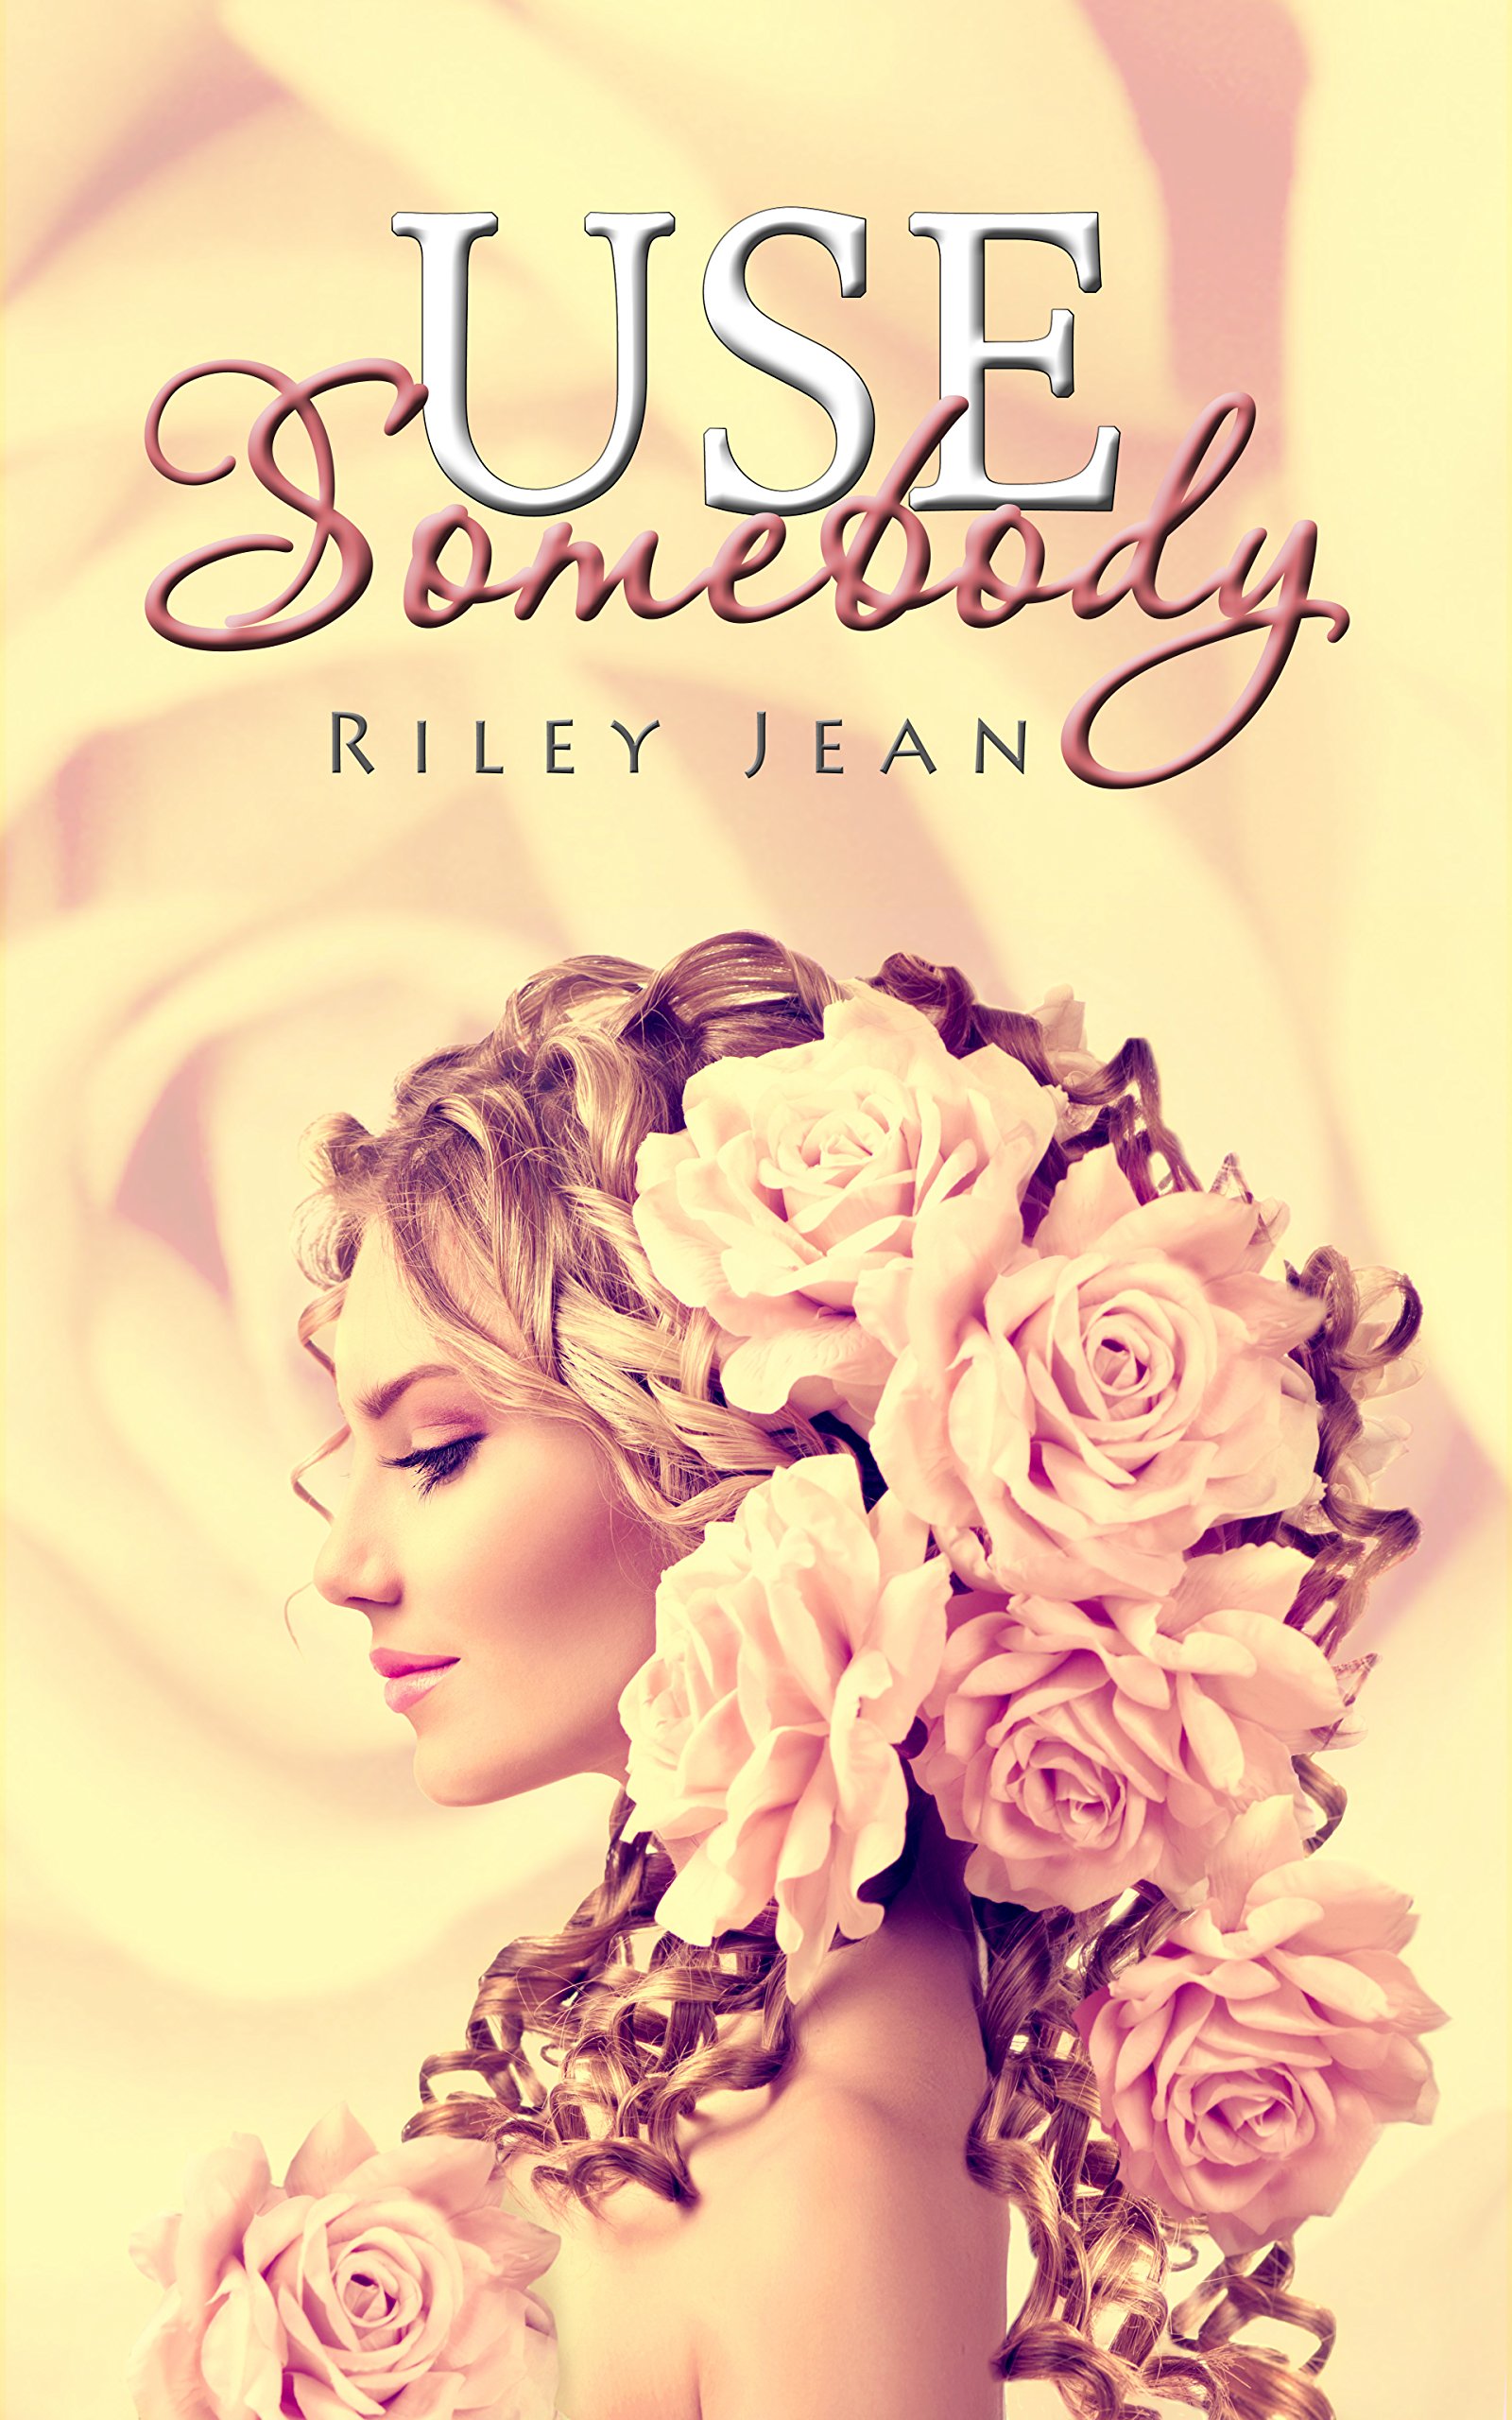 audrey fritz recommends riely jean pic